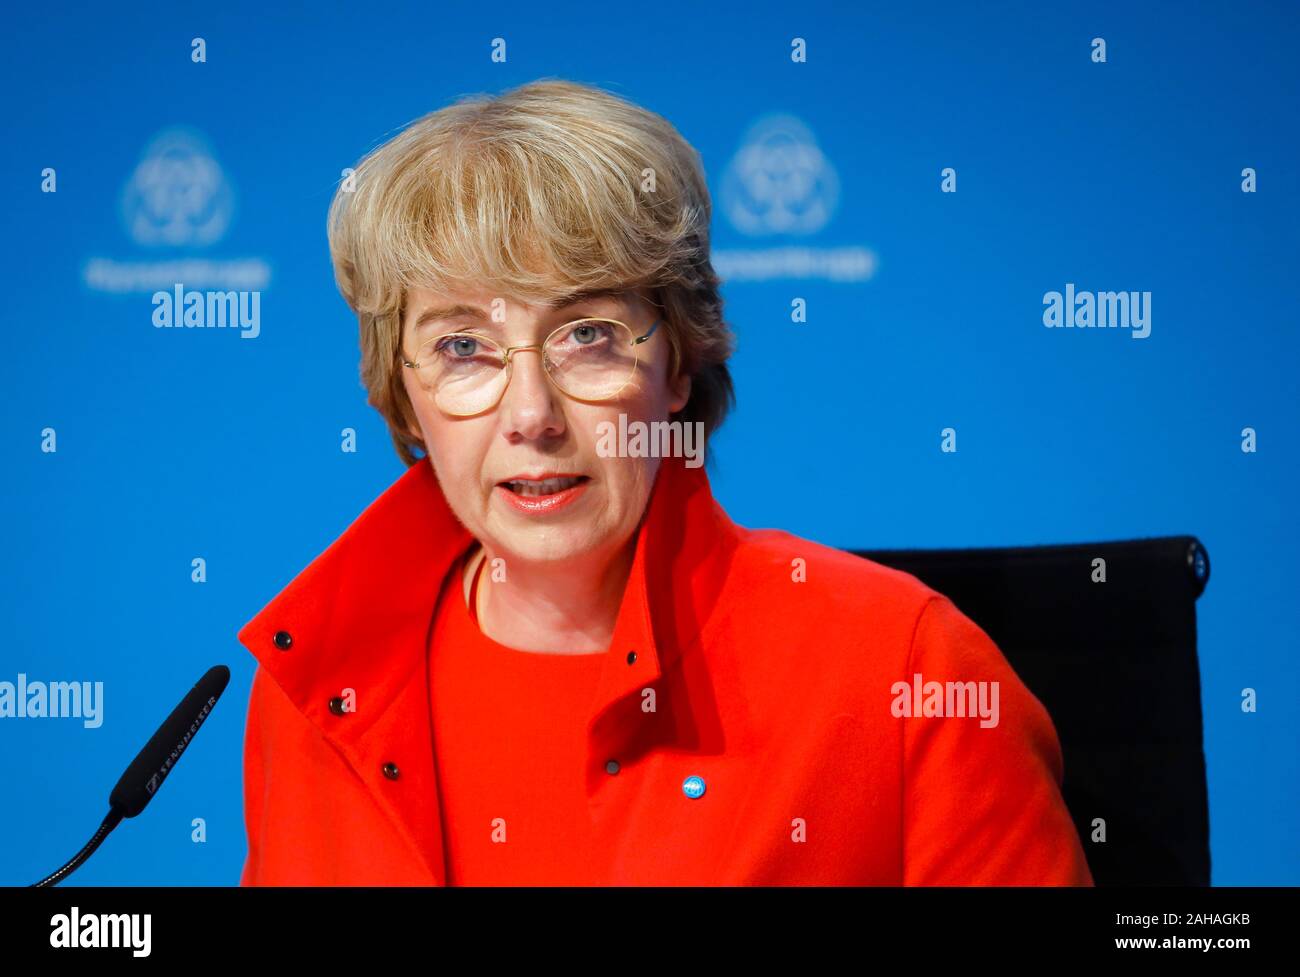 21.11.2019, Essen, North Rhine-Westphalia, Germany - Martina Merz, Chairwoman of the Executive Board of ThyssenKrupp AG, Annual press conference in th Stock Photo